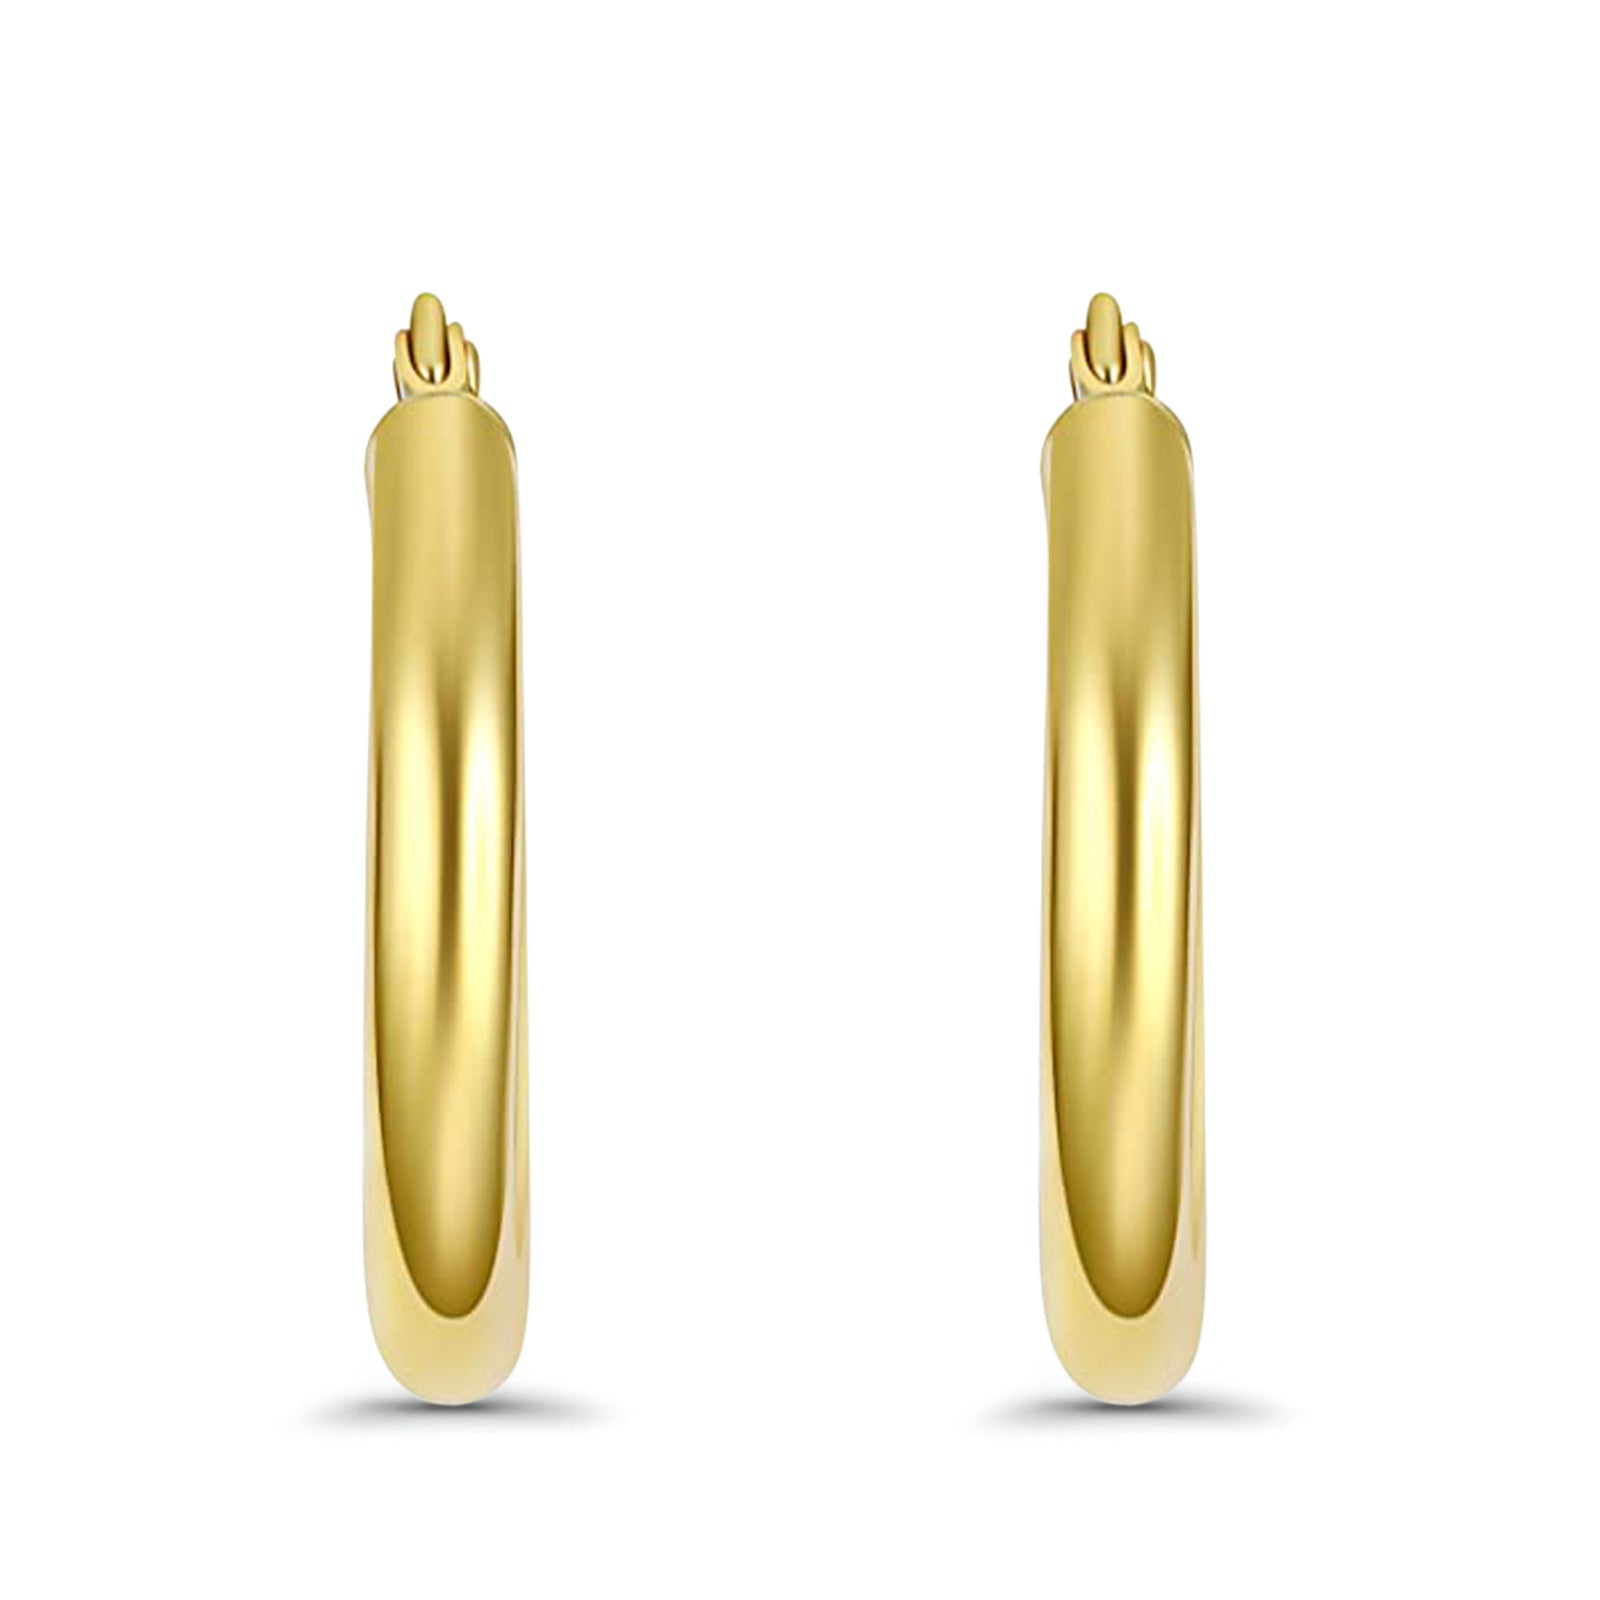 Solid 14K Yellow Gold 3mm Thickness Hoop Earrings - 6 Different Size Available, Best Anniversary Birthday Gift for Her